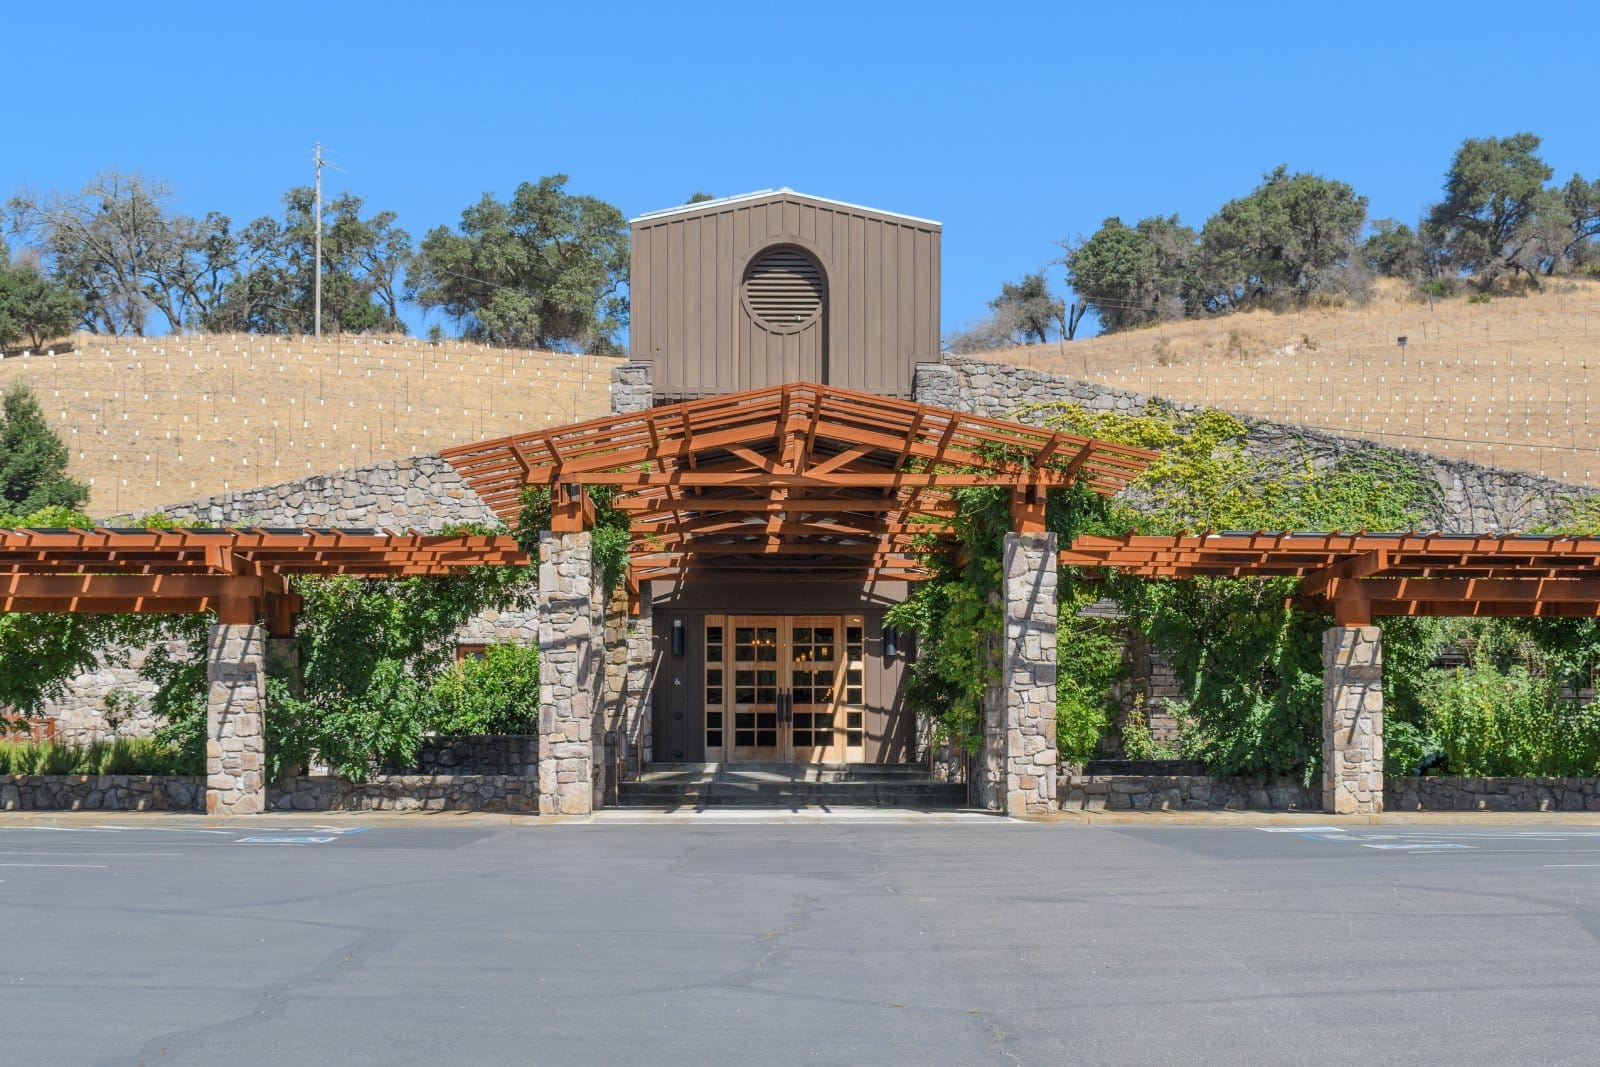 <p class="wp-caption-text">Image Credit: Shutterstock / Arnieby</p>  <p><span>The Silverado Trail runs parallel to Highway 29 on the eastern side of Napa Valley and offers a scenic alternative route through the wine country. This less-traveled road stretches over 30 miles, winding past vineyards, boutique wineries, and stunning landscapes. The Silverado Trail is favored by cyclists and motorists alike for its serene beauty and access to some of Napa Valley’s renowned wineries and hidden gems. The trail also offers numerous spots for picnicking and photography, making it a perfect way to spend a day exploring the valley at a leisurely pace.</span></p>